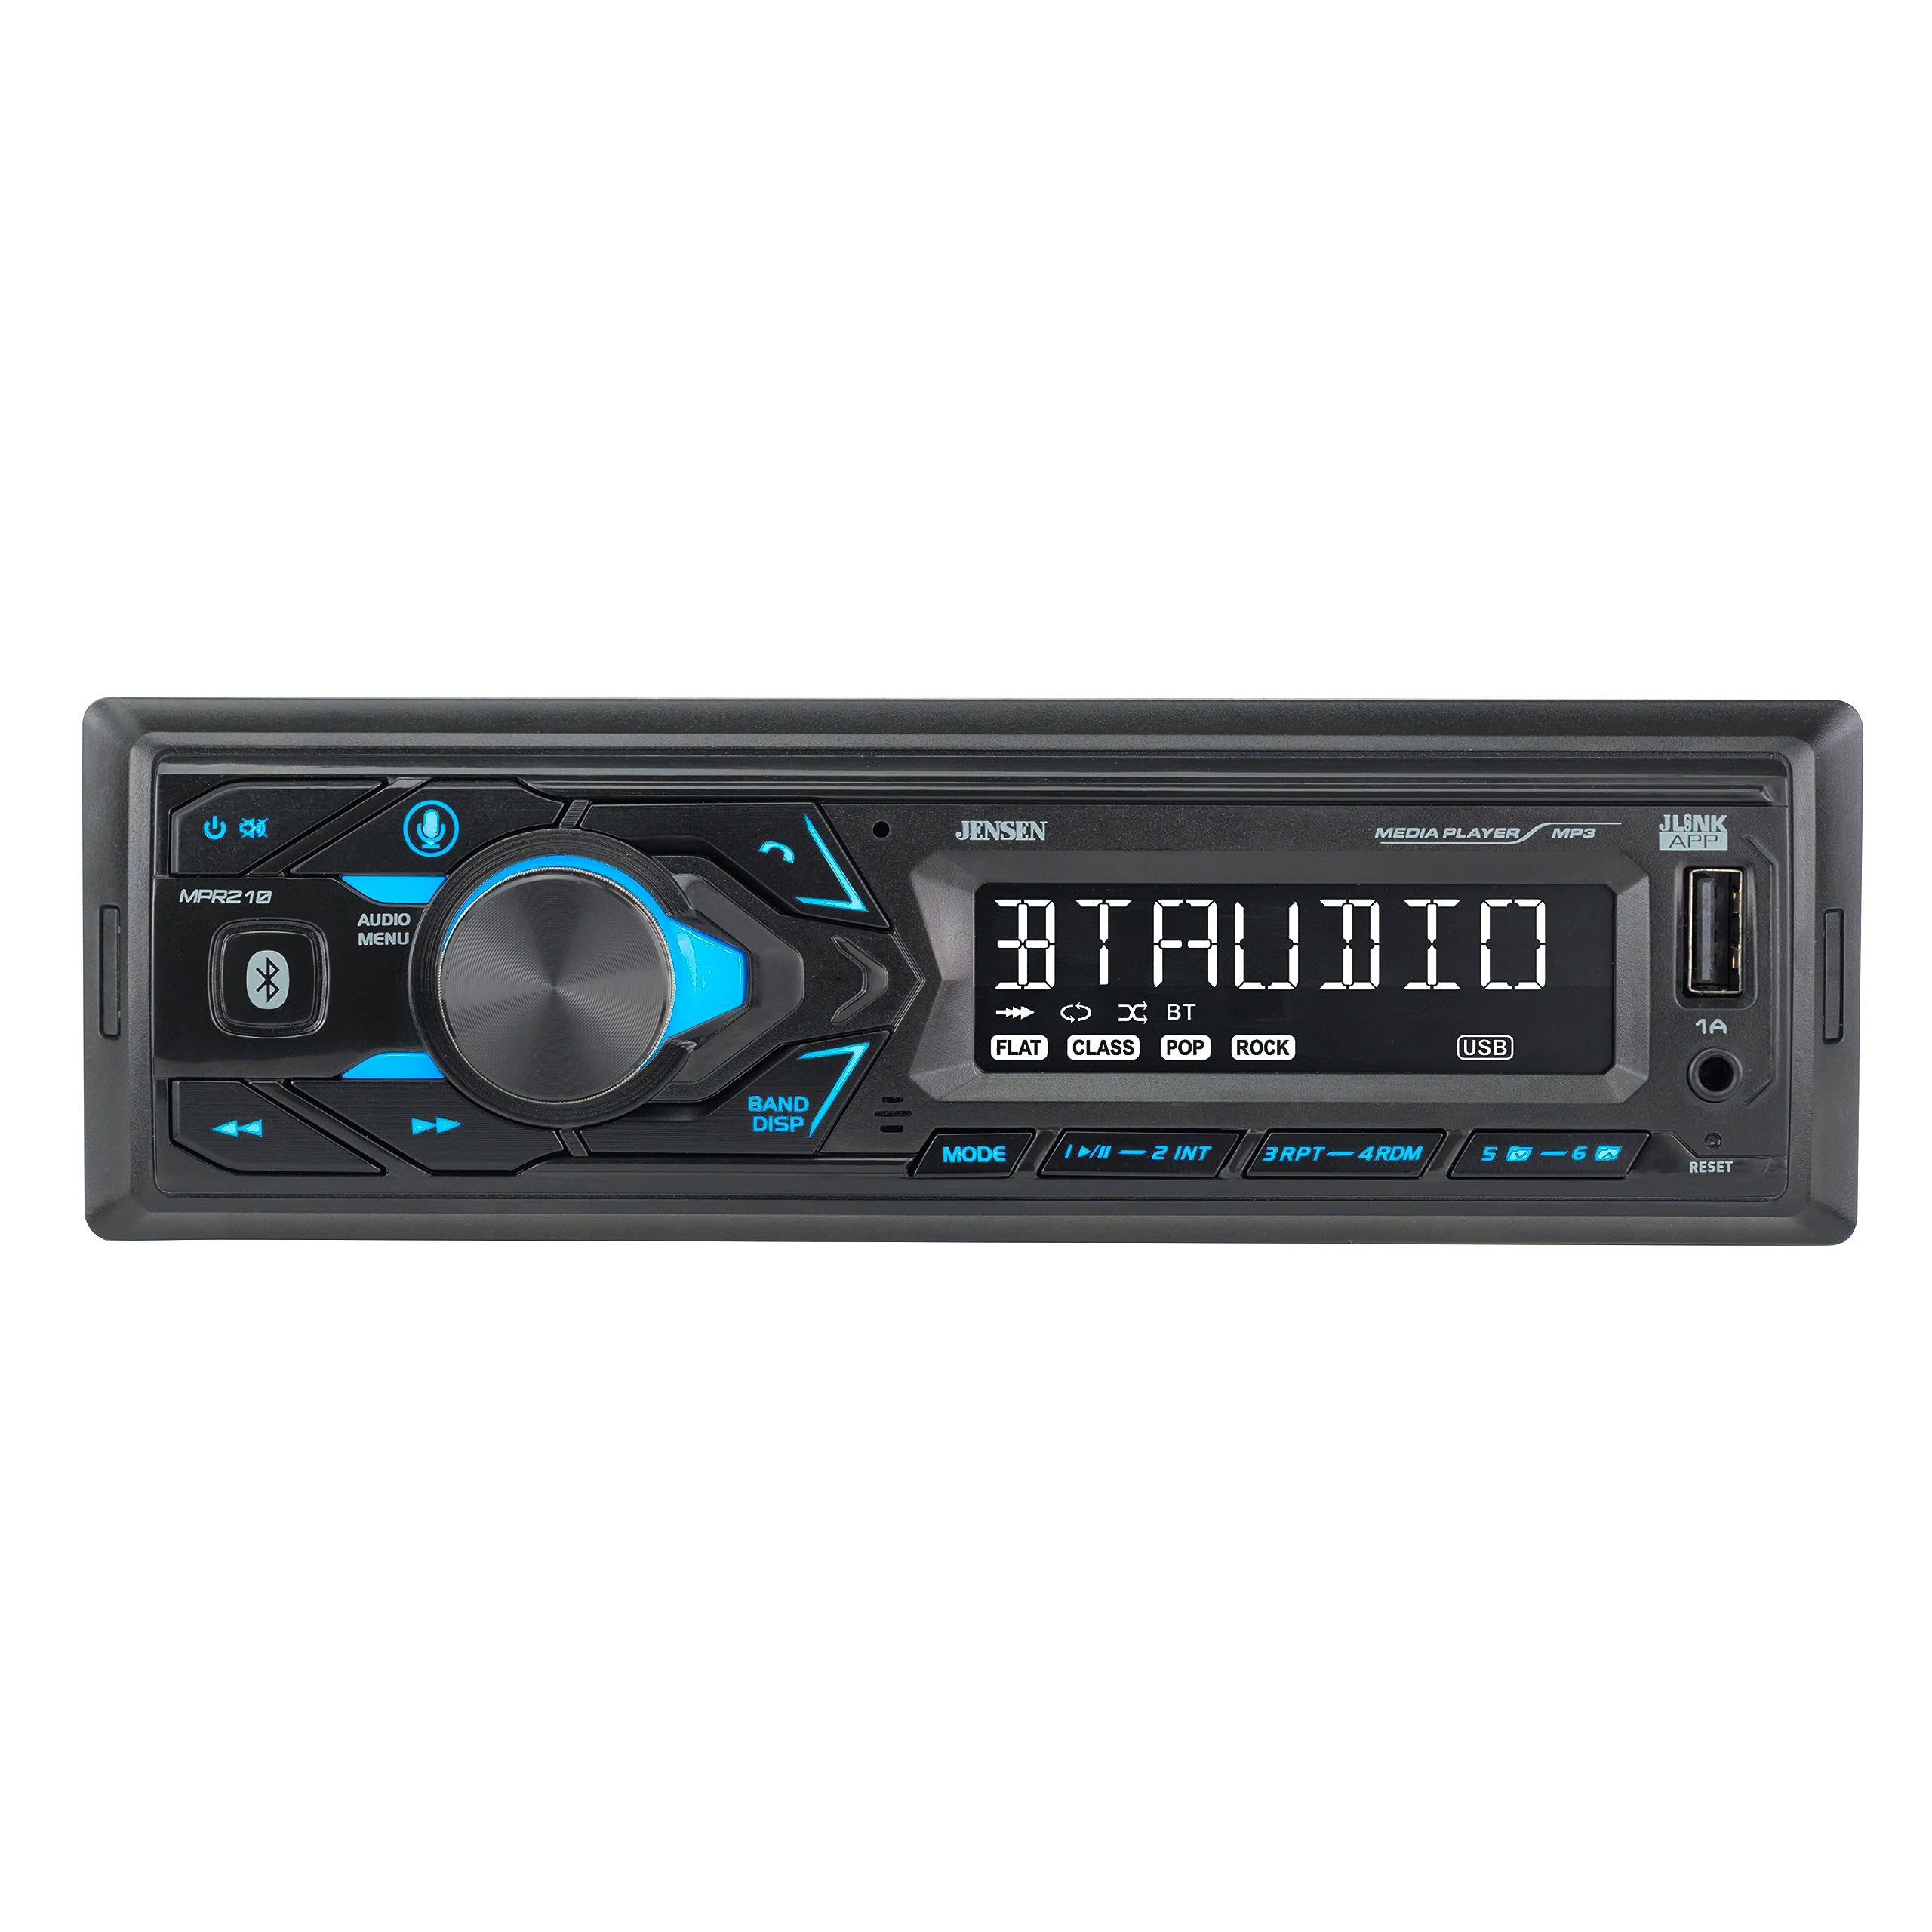 JENSEN MPR210 7 Character LCD Single DIN Car Stereo Radio | Push to Talk Assistant | Bluetooth Hands Free Calling & Music Streaming | AM/FM Radio | USB Playback & Charging | Not a CD Player